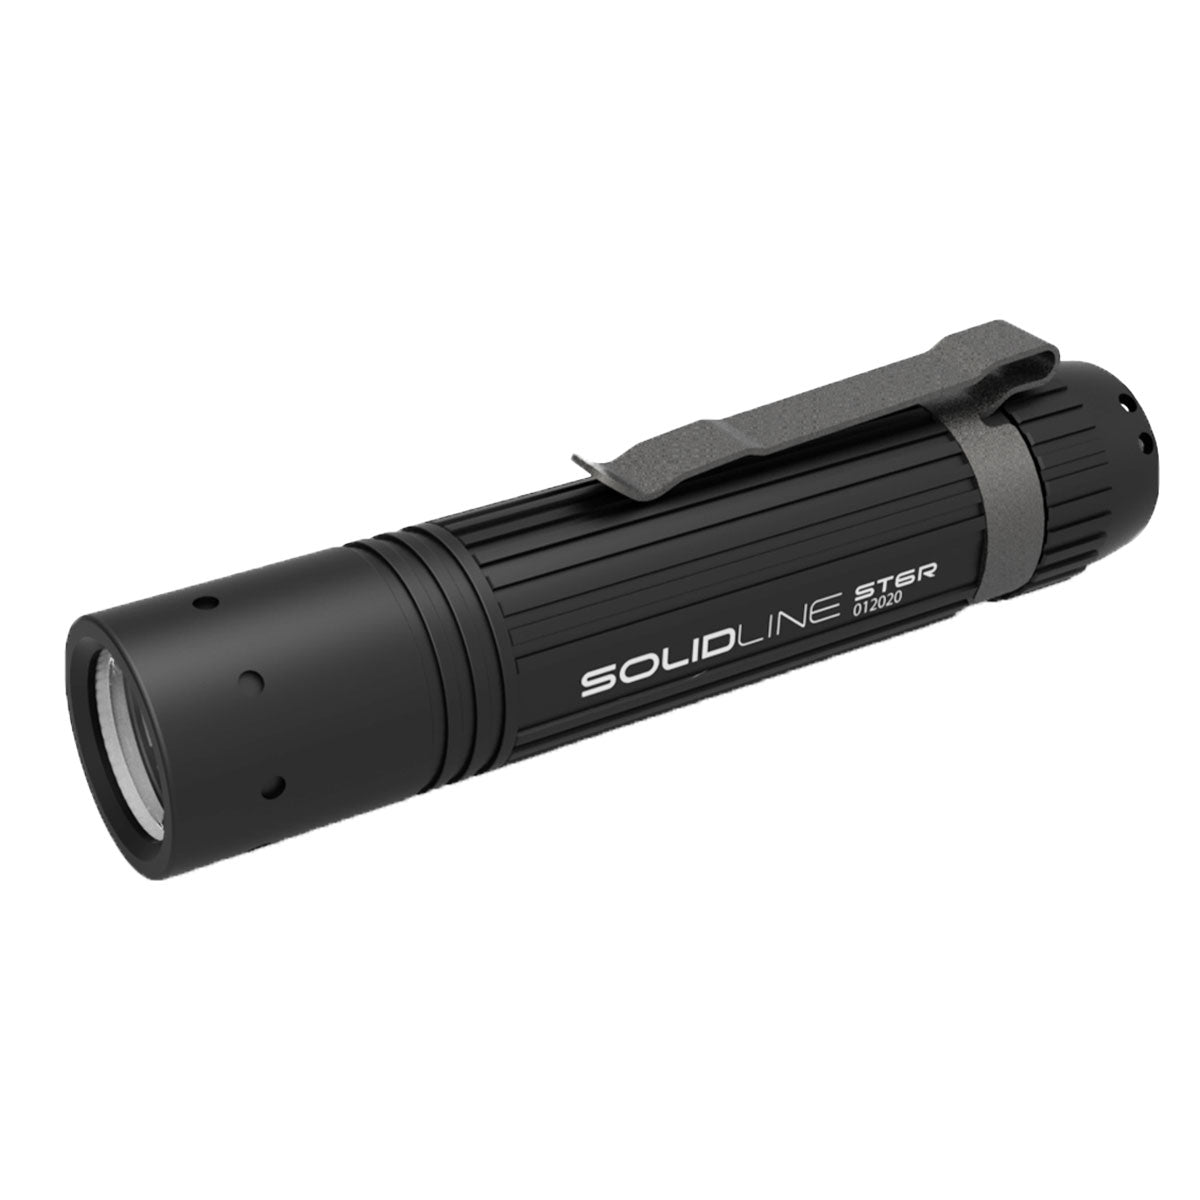 Ledlenser Solidline ST6R 800lm Rechargeable Torch -  - Mansfield Hunting & Fishing - Products to prepare for Corona Virus